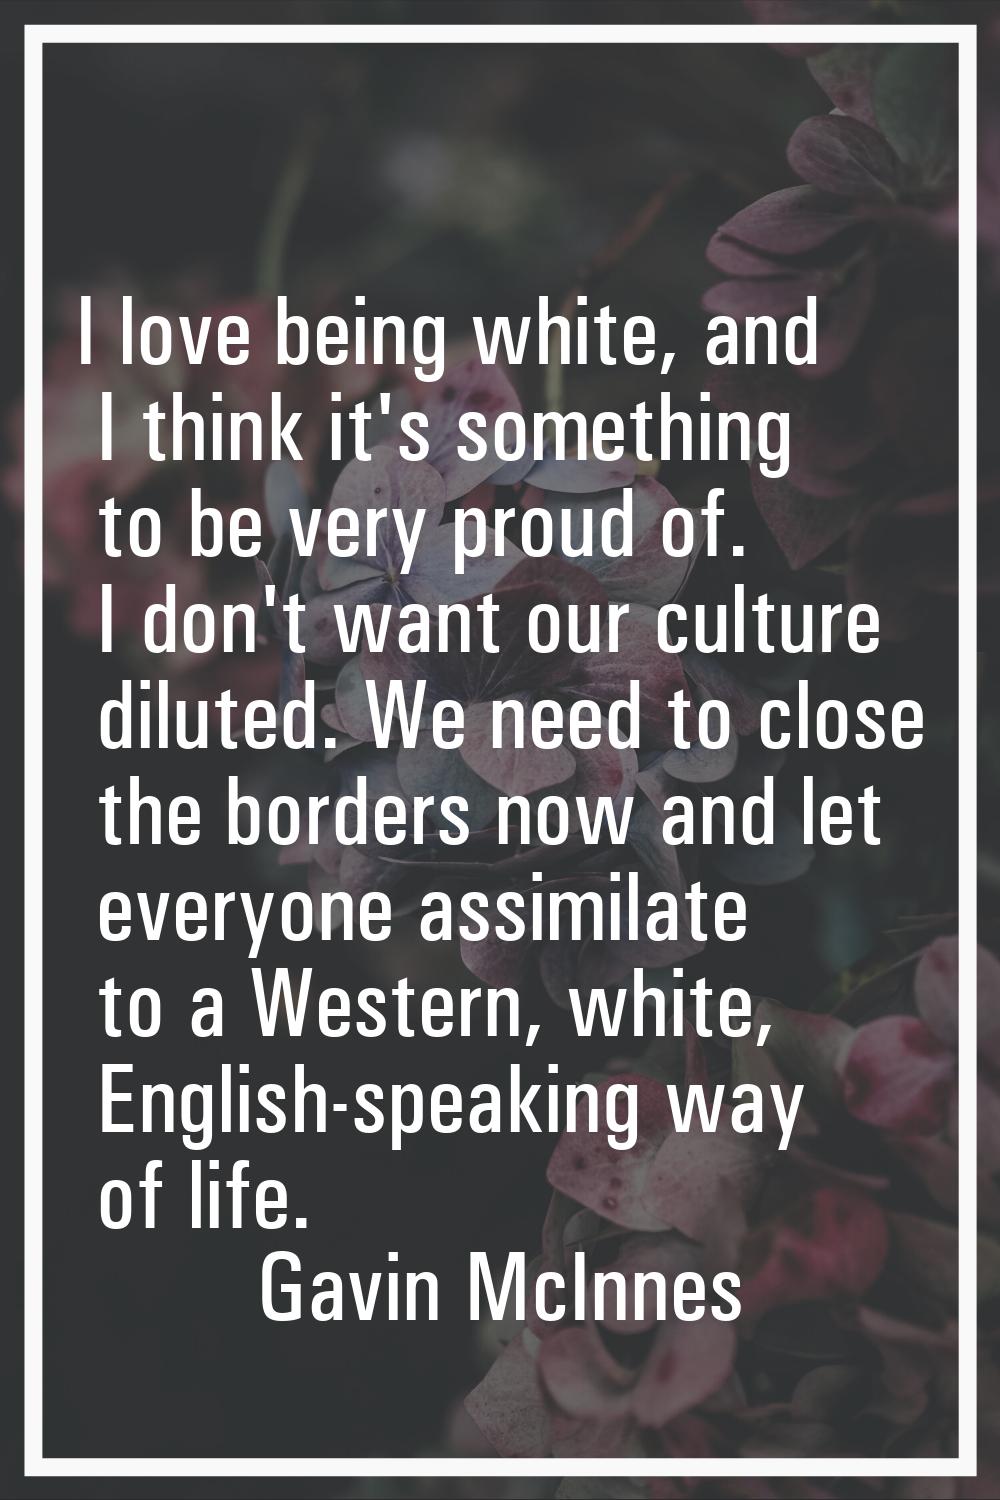 I love being white, and I think it's something to be very proud of. I don't want our culture dilute